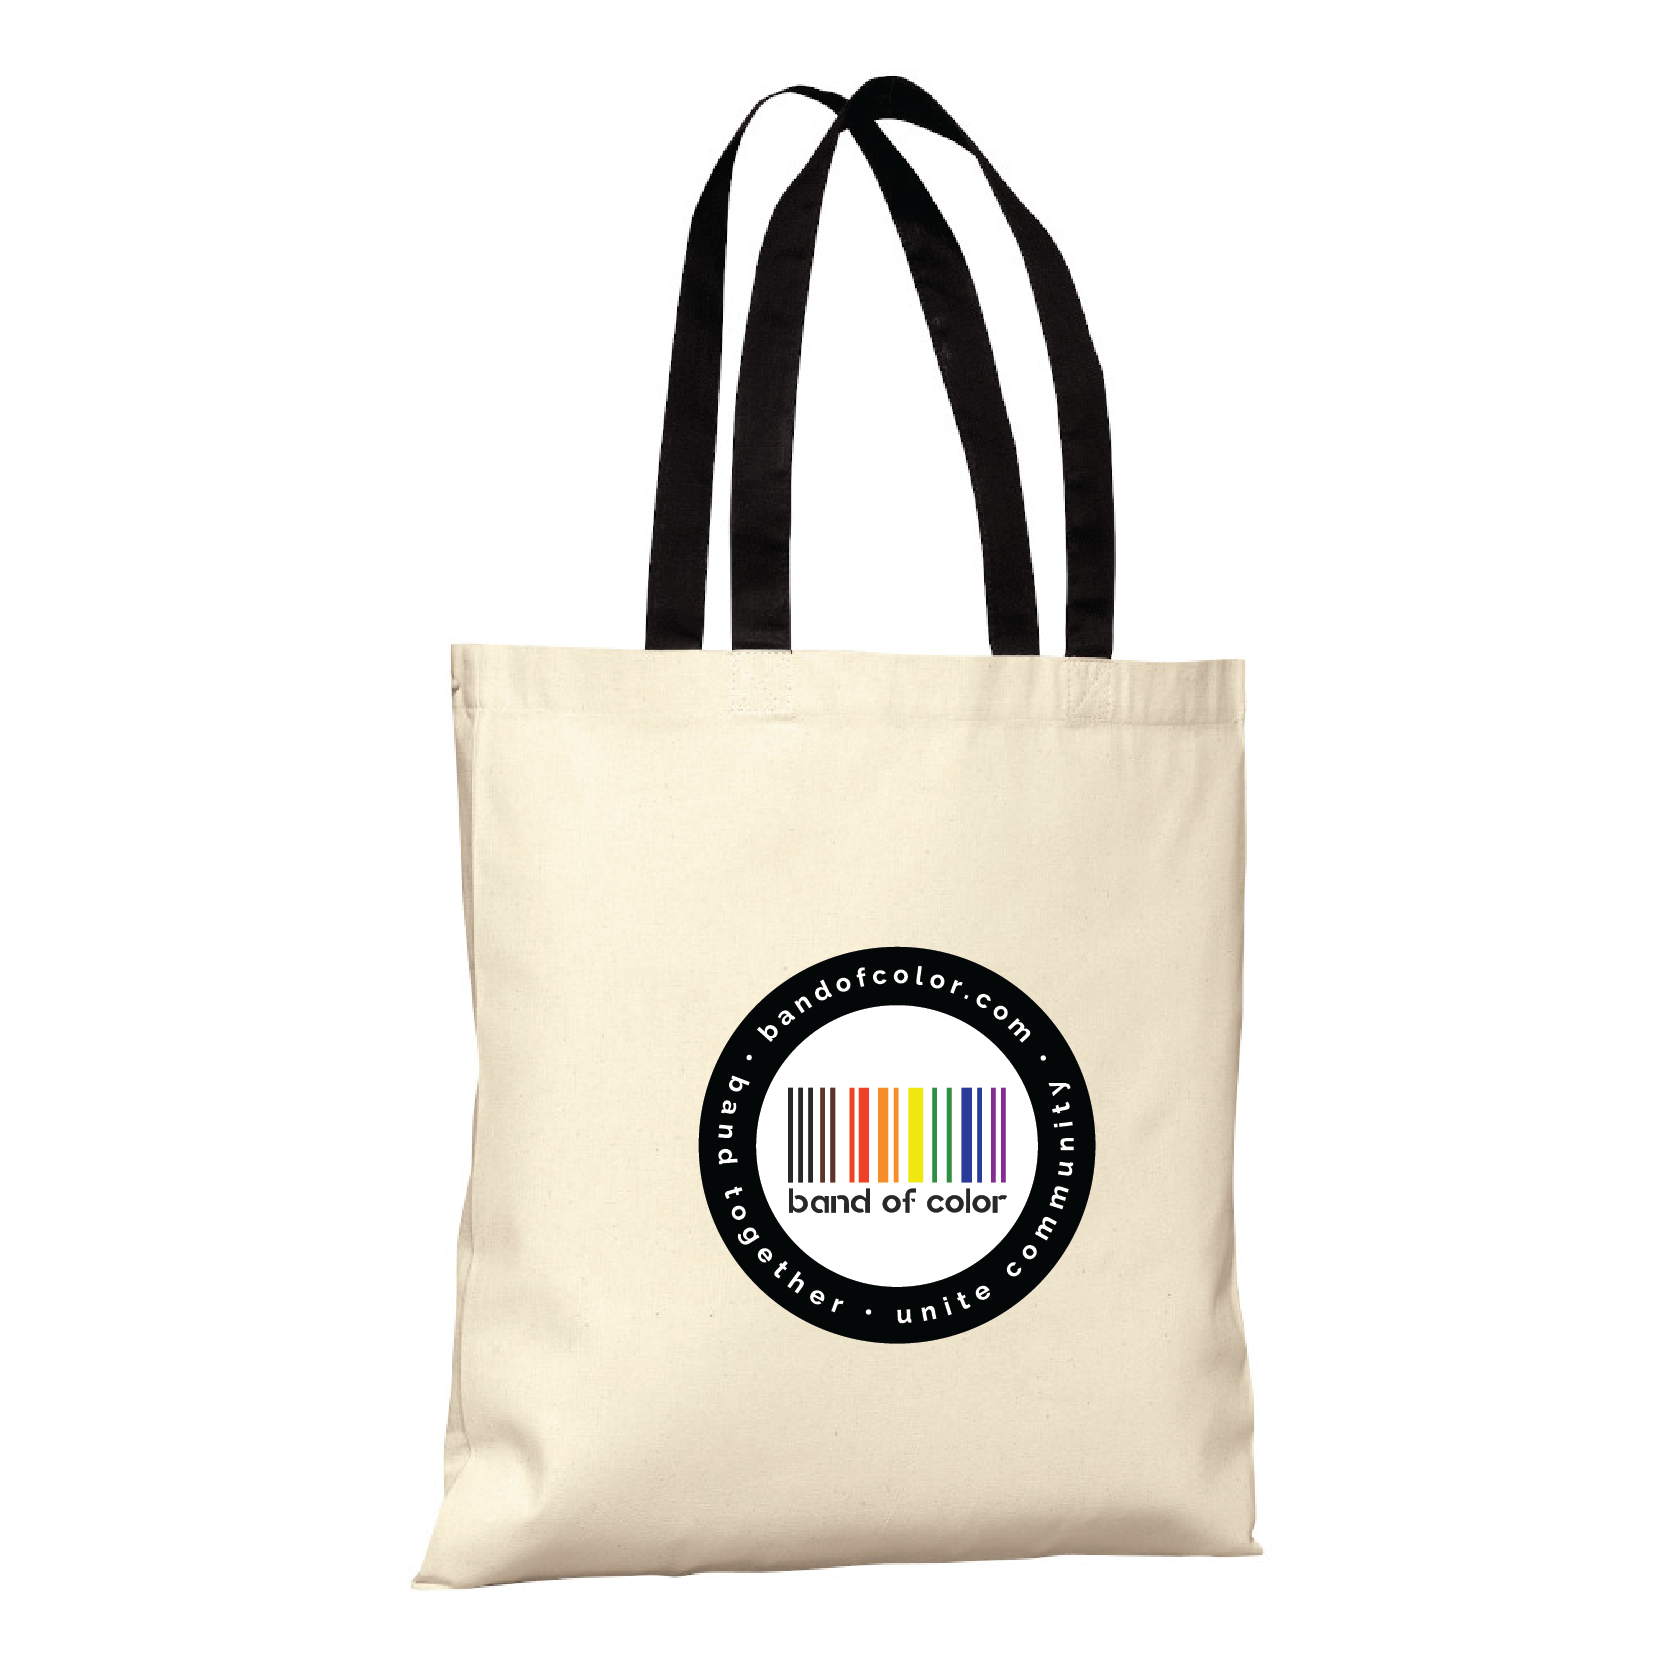 band of color shopper tote - accent handles